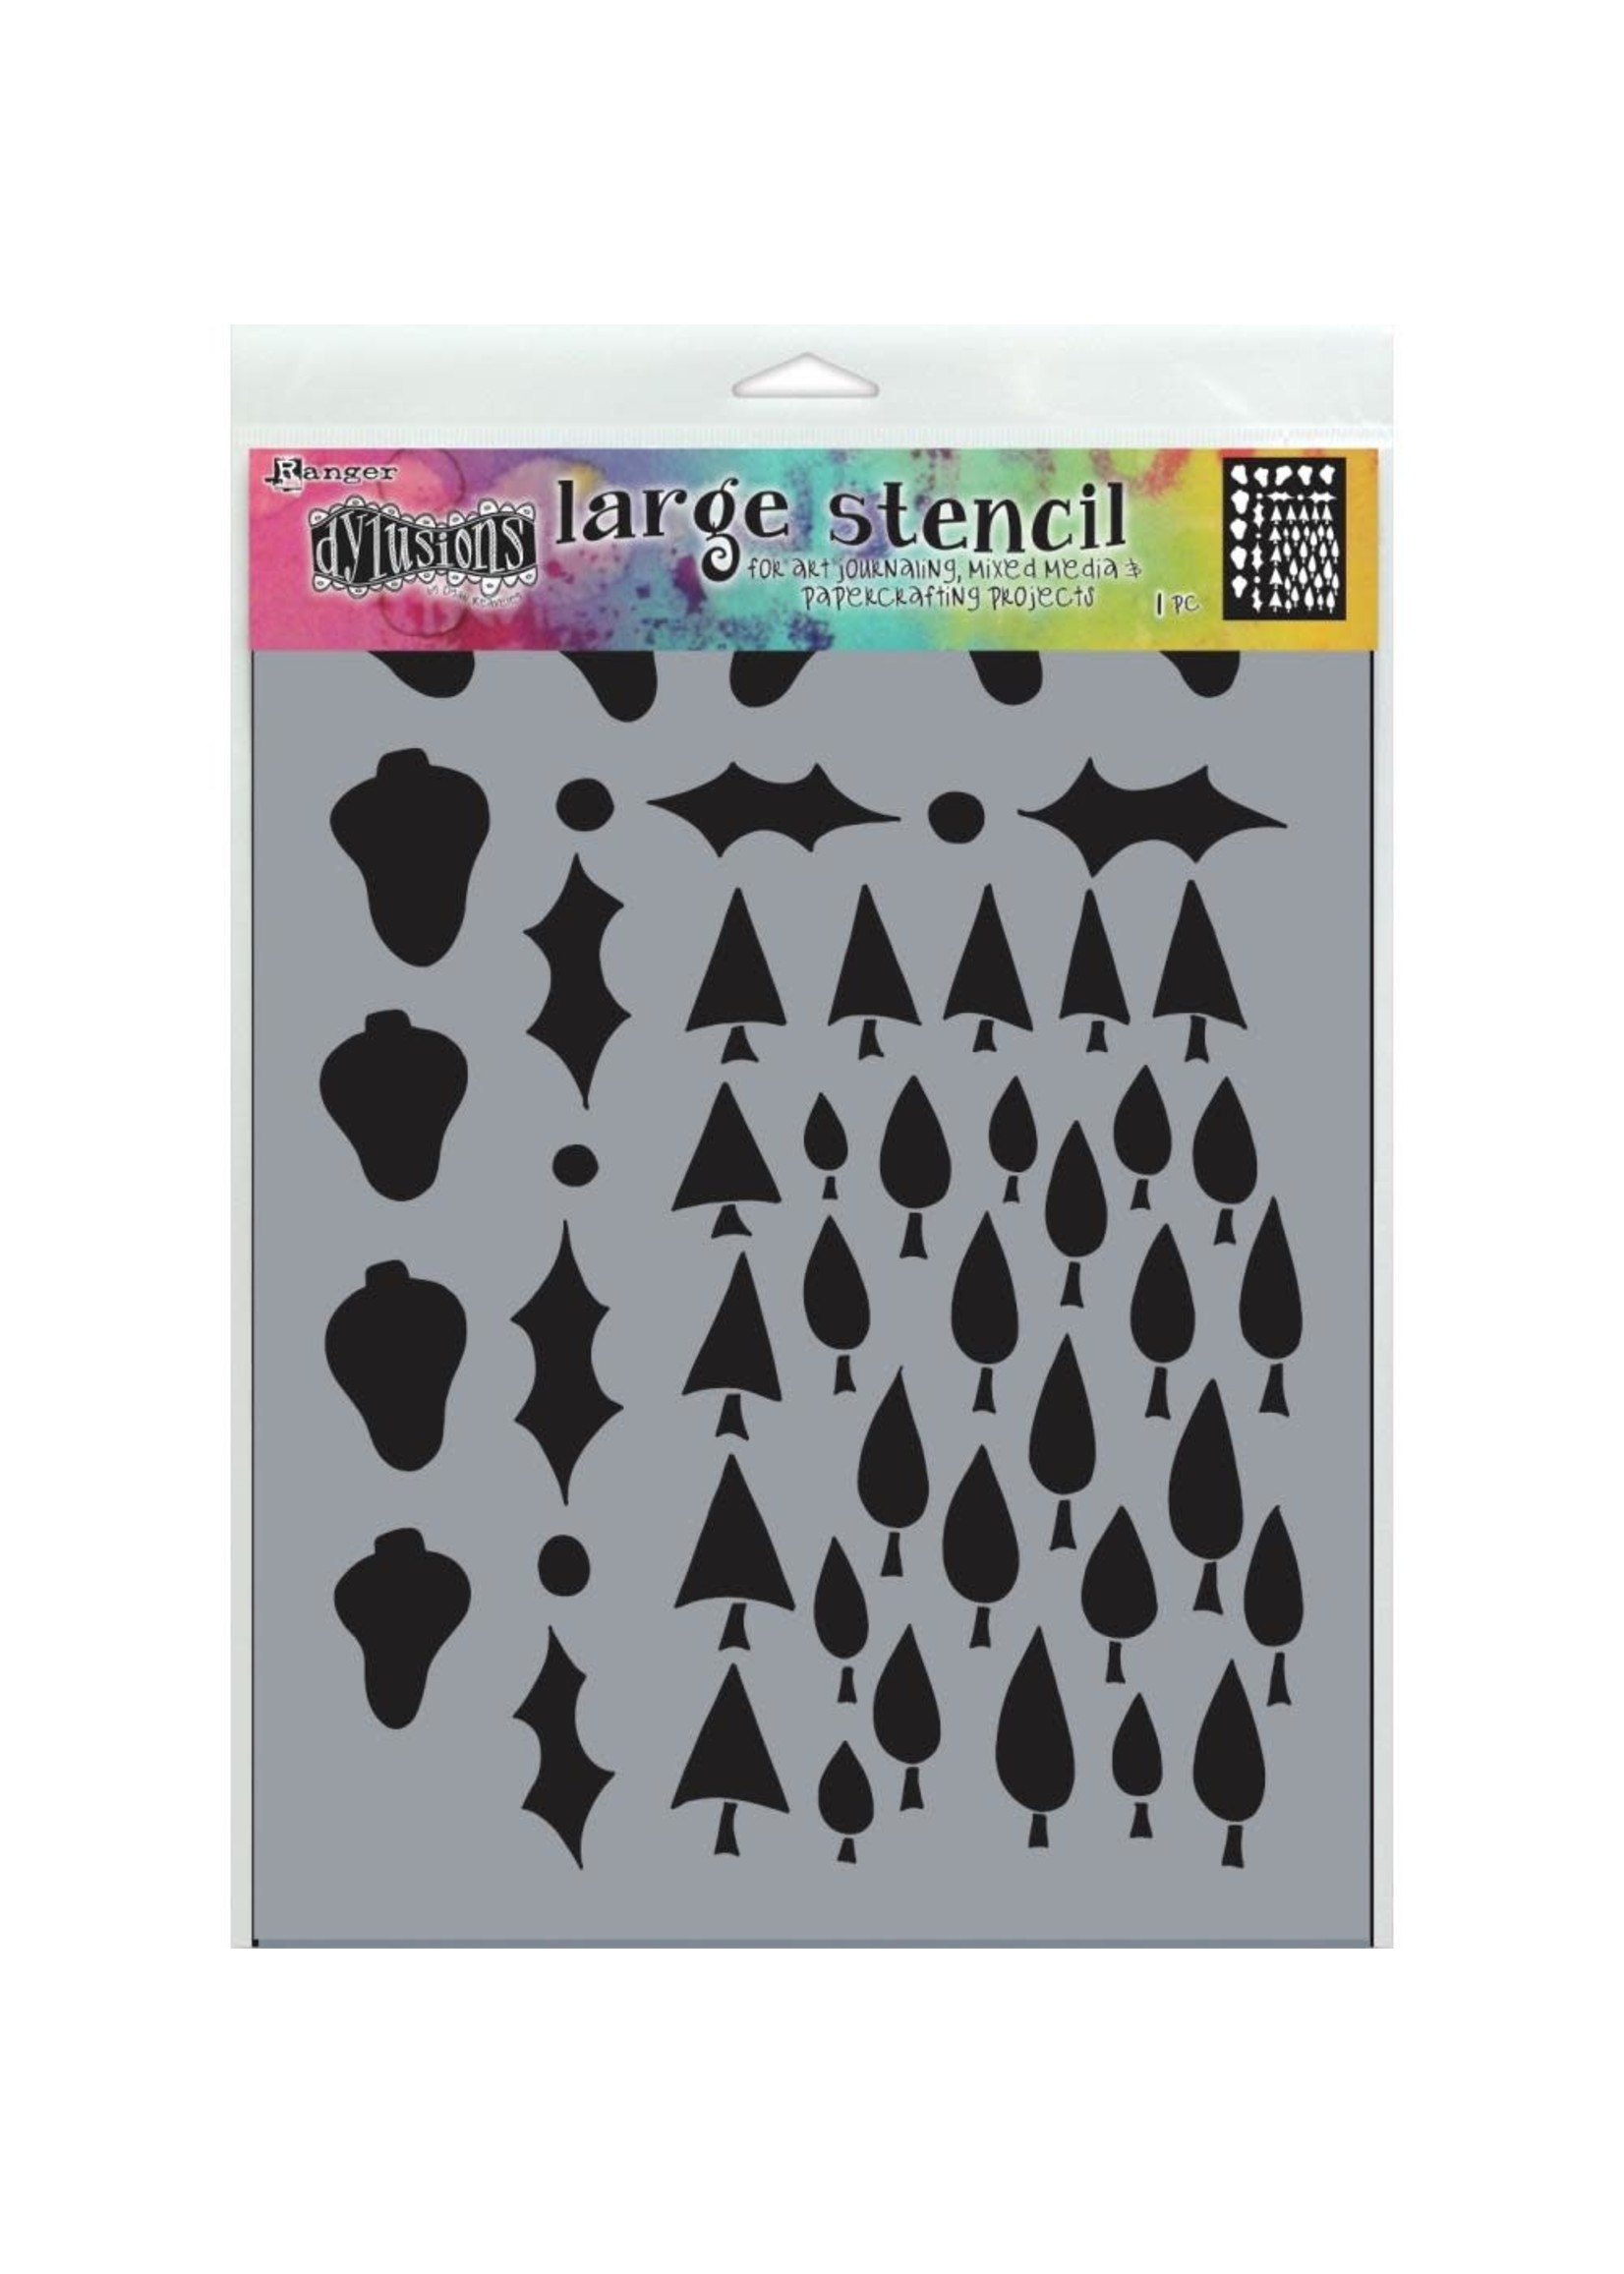 DYLUSIONS Tree Border - Large Stencil